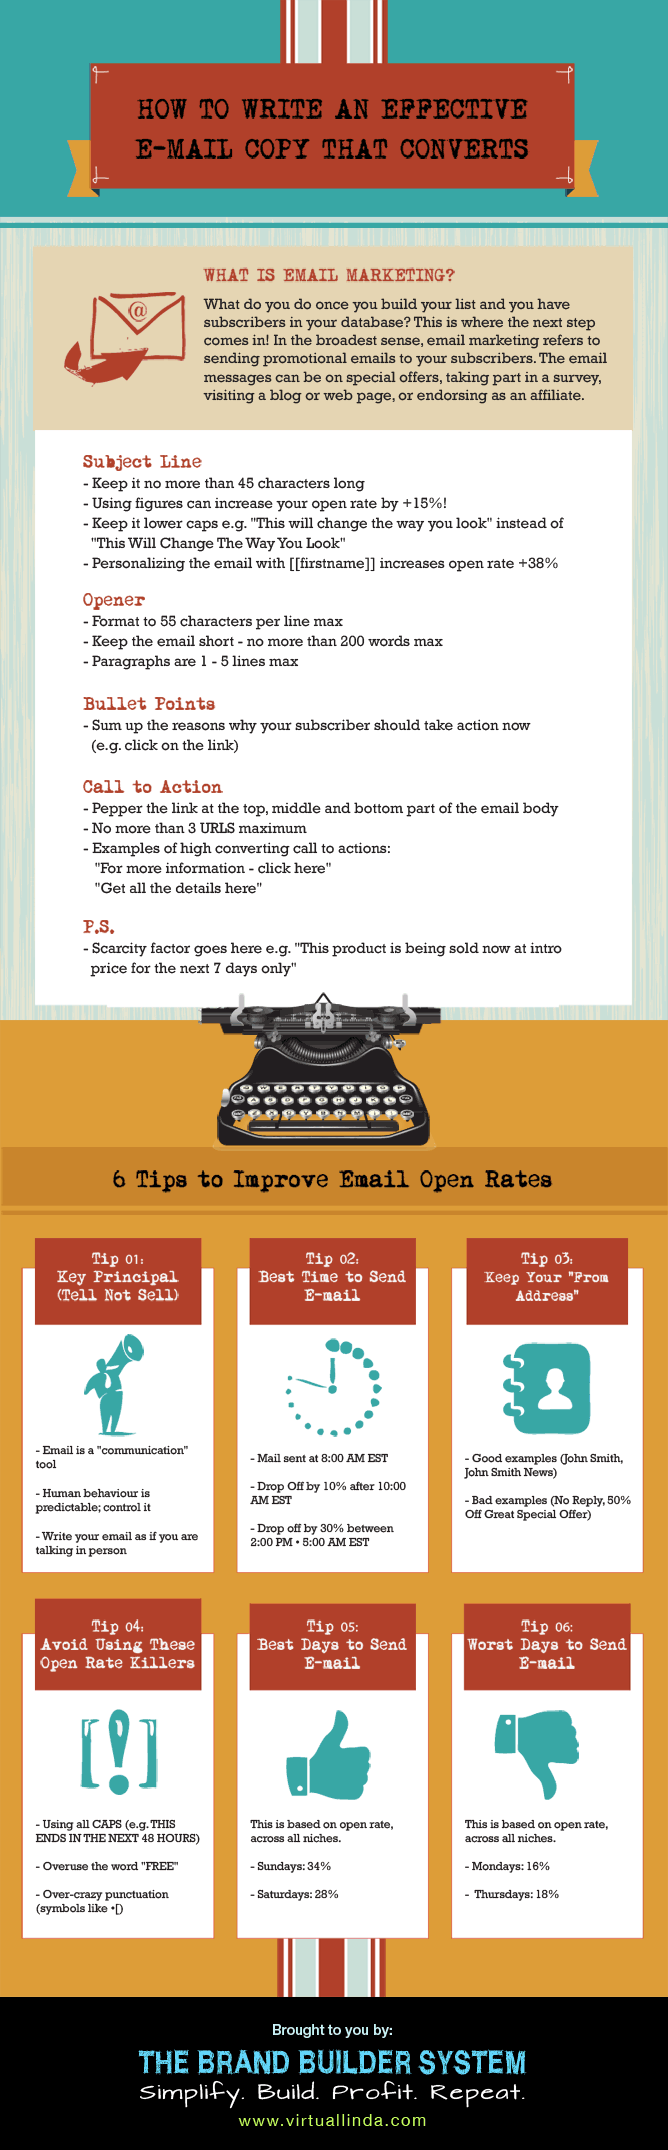 How To Write Effective Email Copy That Converts [INFOGRAPHIC]